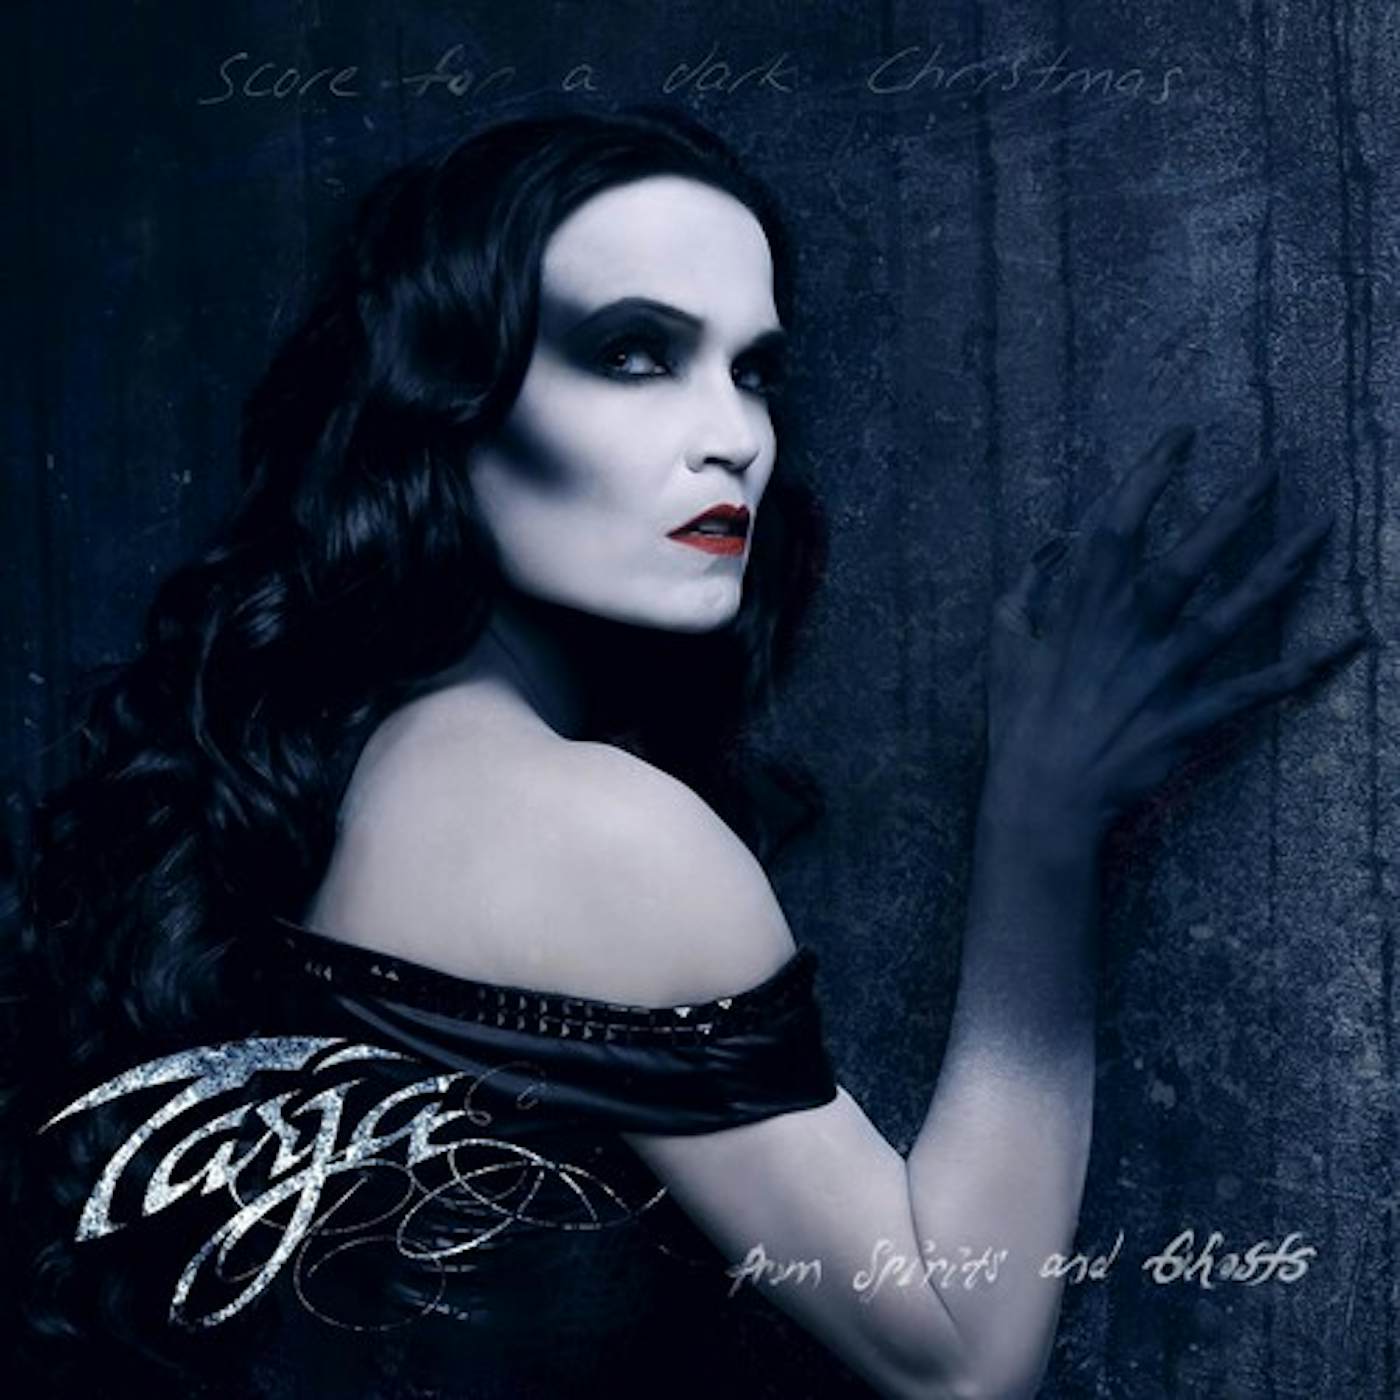 Tarja FROM SPIRITS & GHOSTS (SCORE FOR A DARK CHRISTMAS) CD